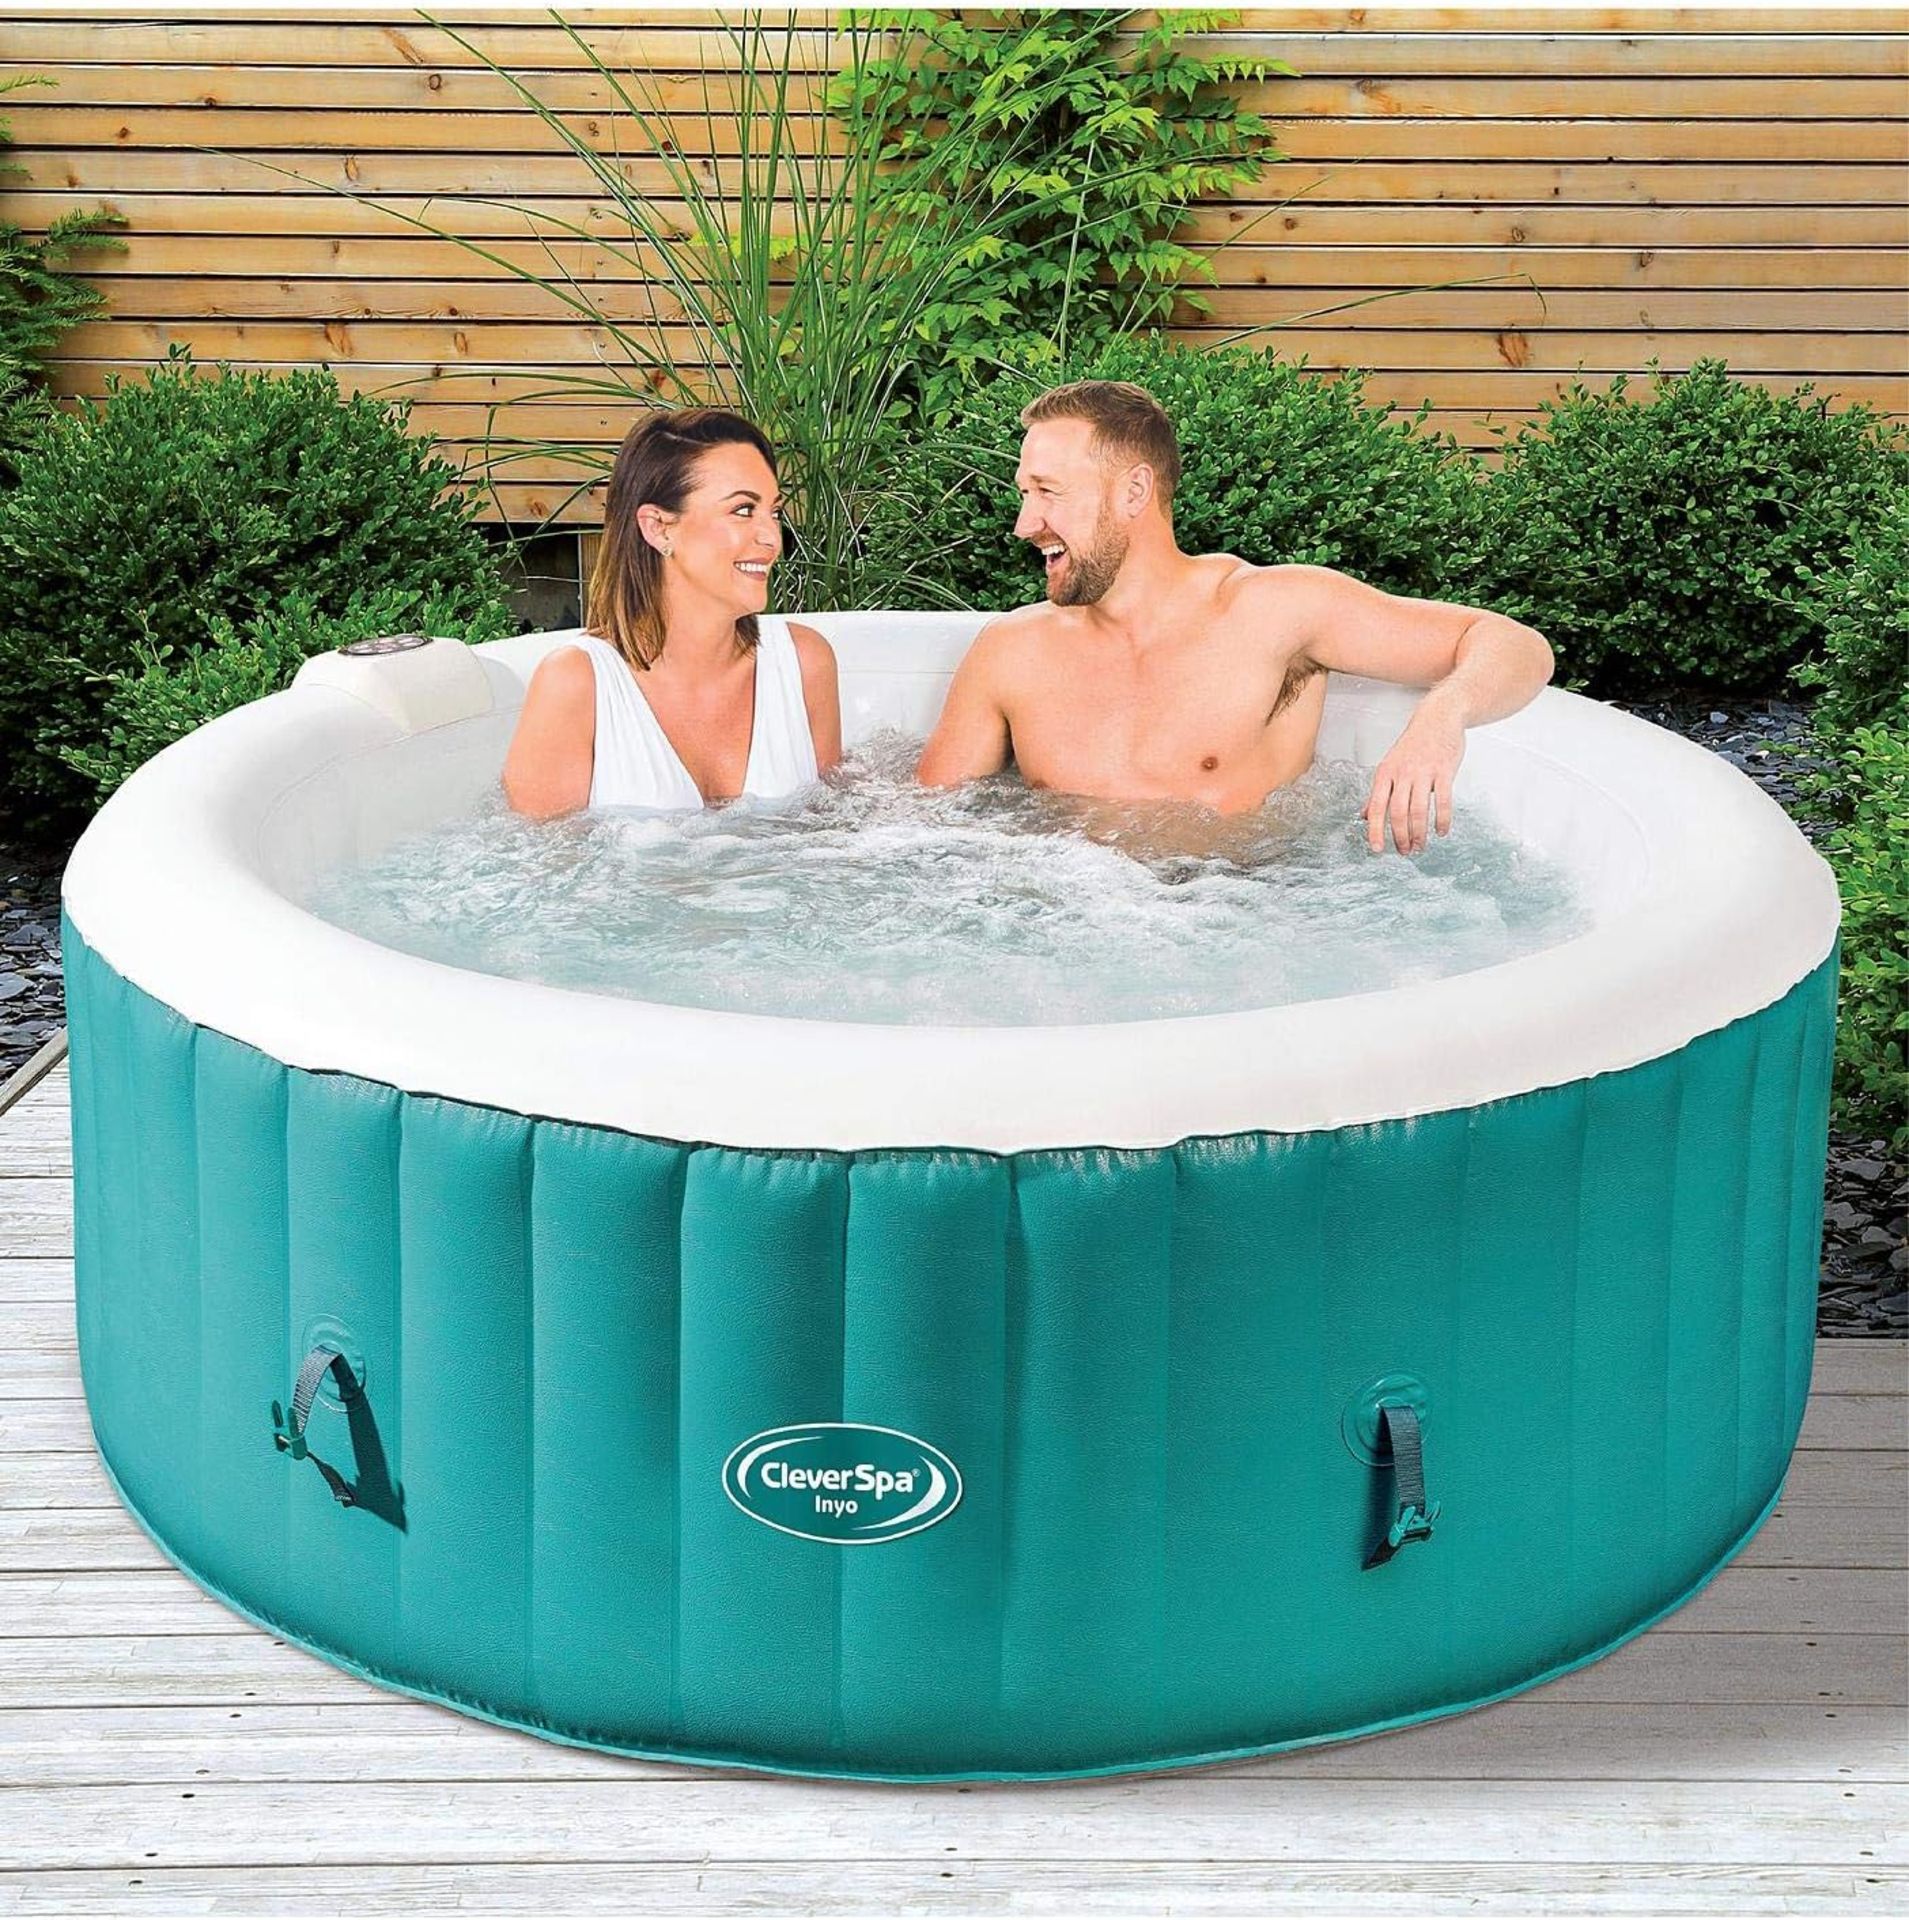 TRADE LOT 4 x New & Boxed CleverSpa Inyo 4 Person Hot Tub. RRP £499.99 each. There is no occasion or - Image 2 of 5